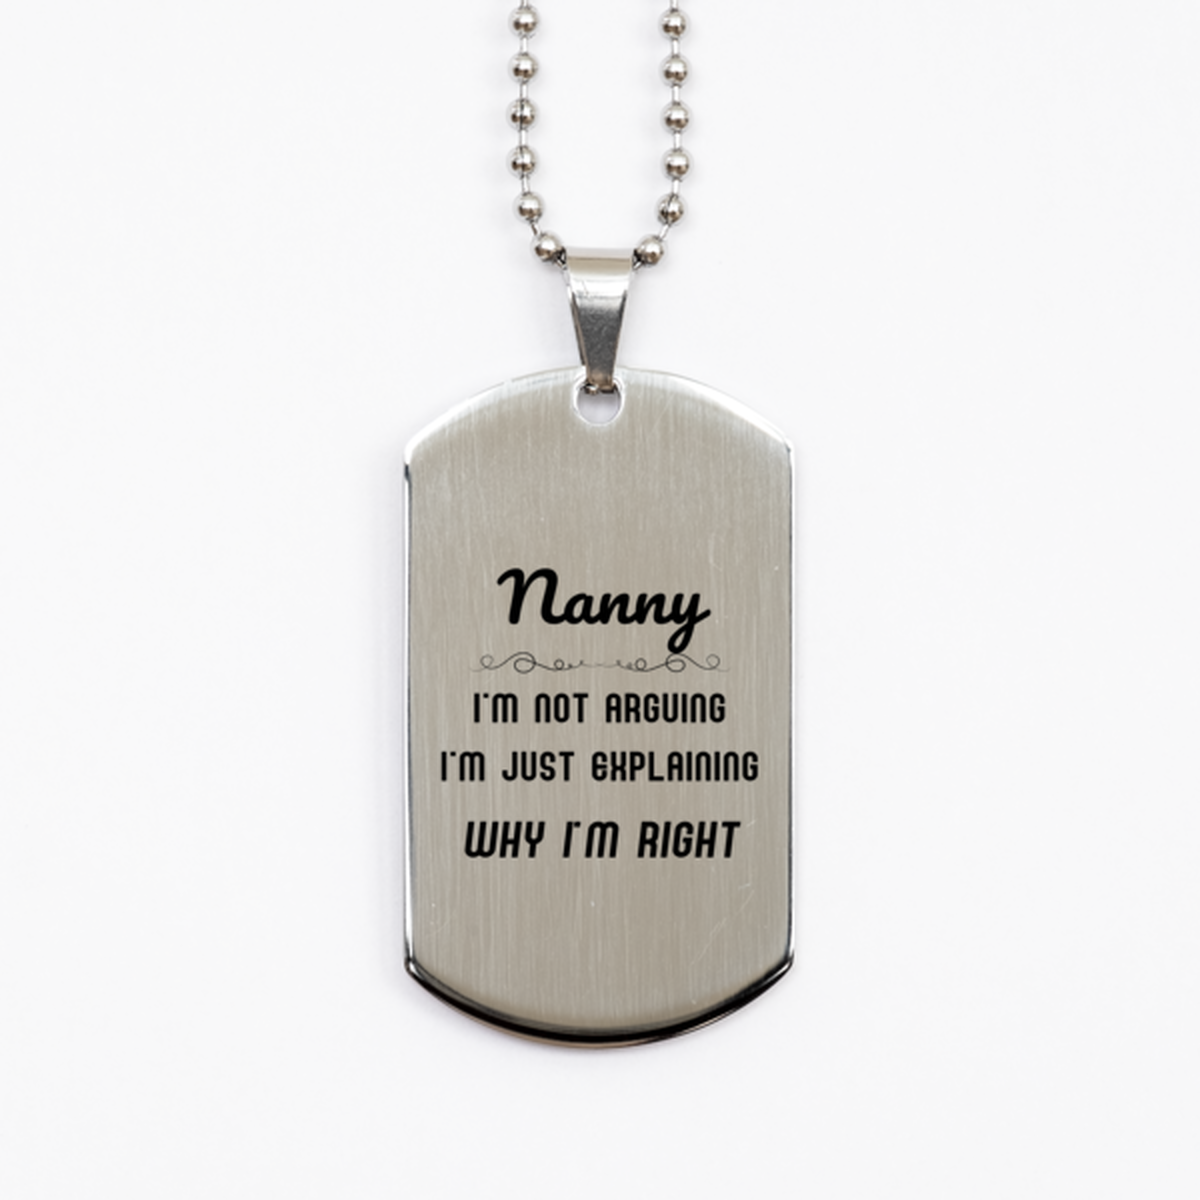 Nanny I'm not Arguing. I'm Just Explaining Why I'm RIGHT Silver Dog Tag, Funny Saying Quote Nanny Gifts For Nanny Graduation Birthday Christmas Gifts for Men Women Coworker